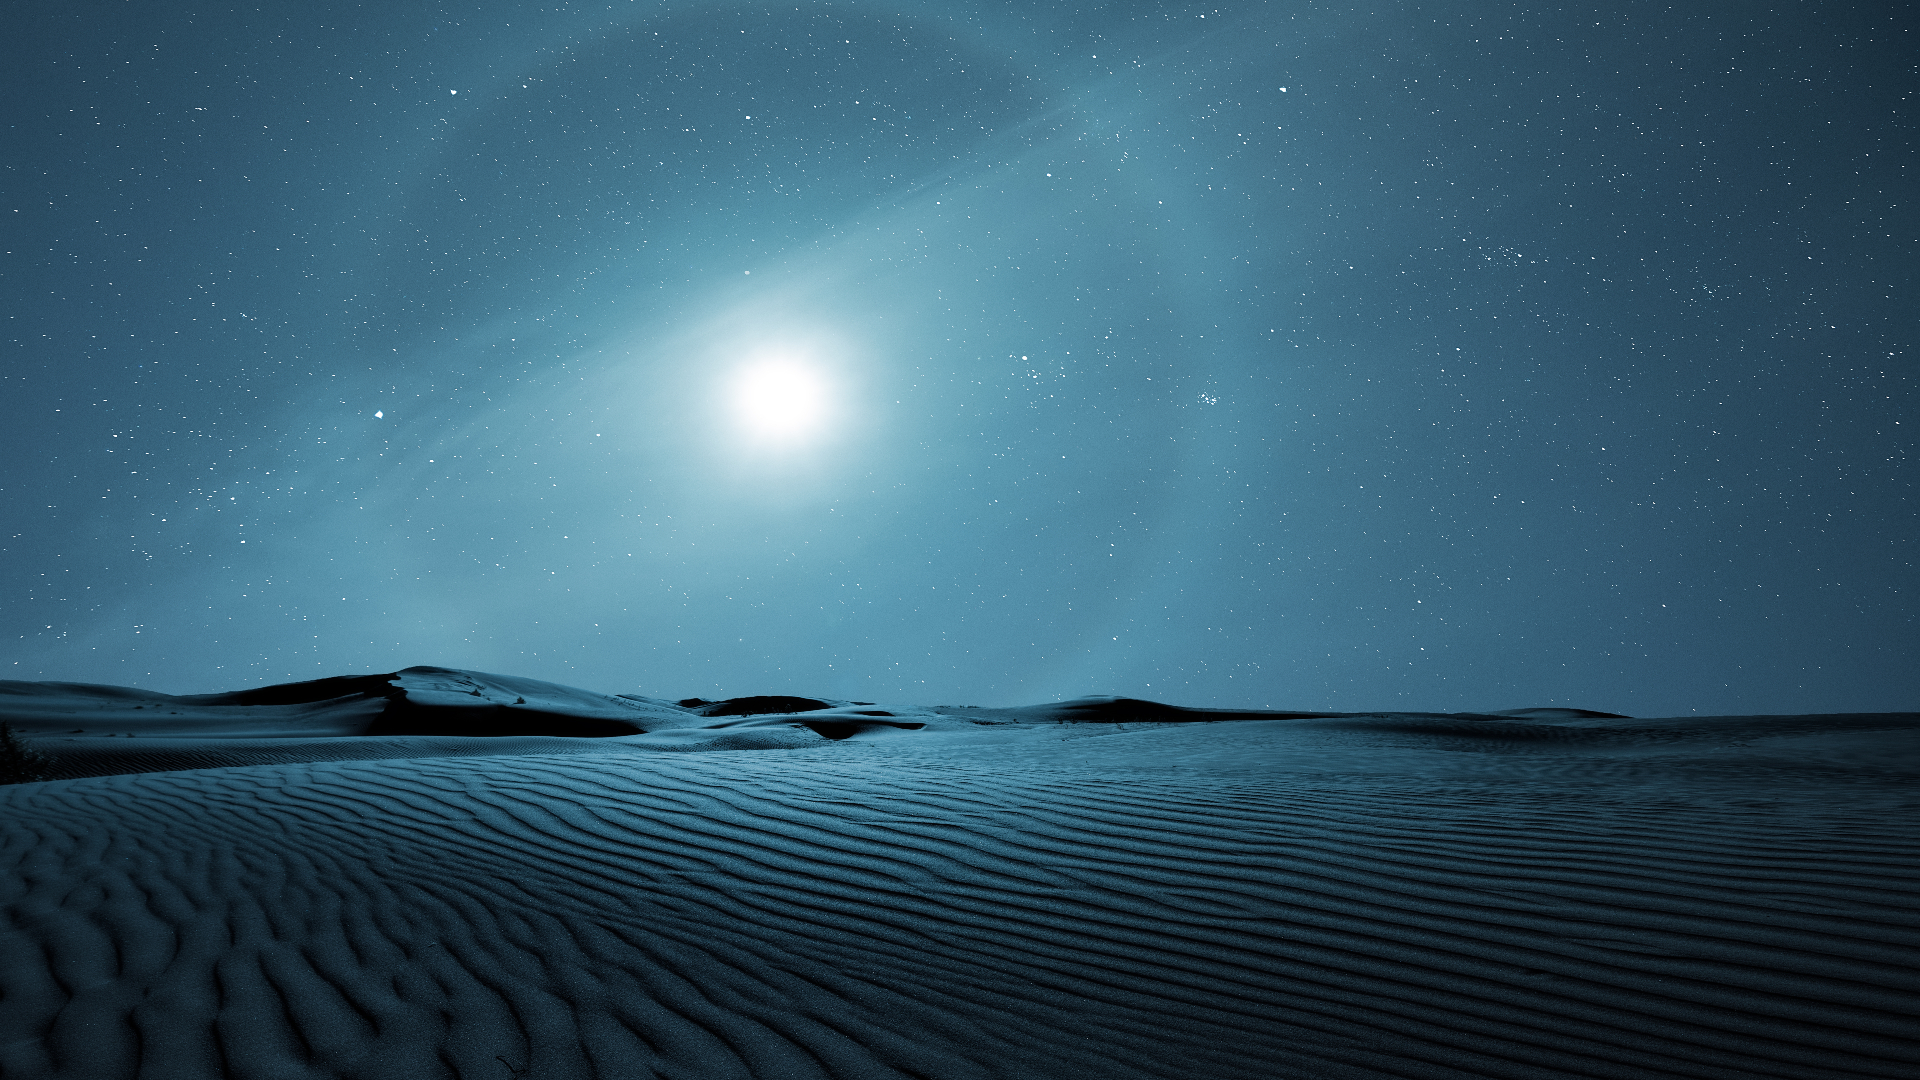 What is a moon halo?